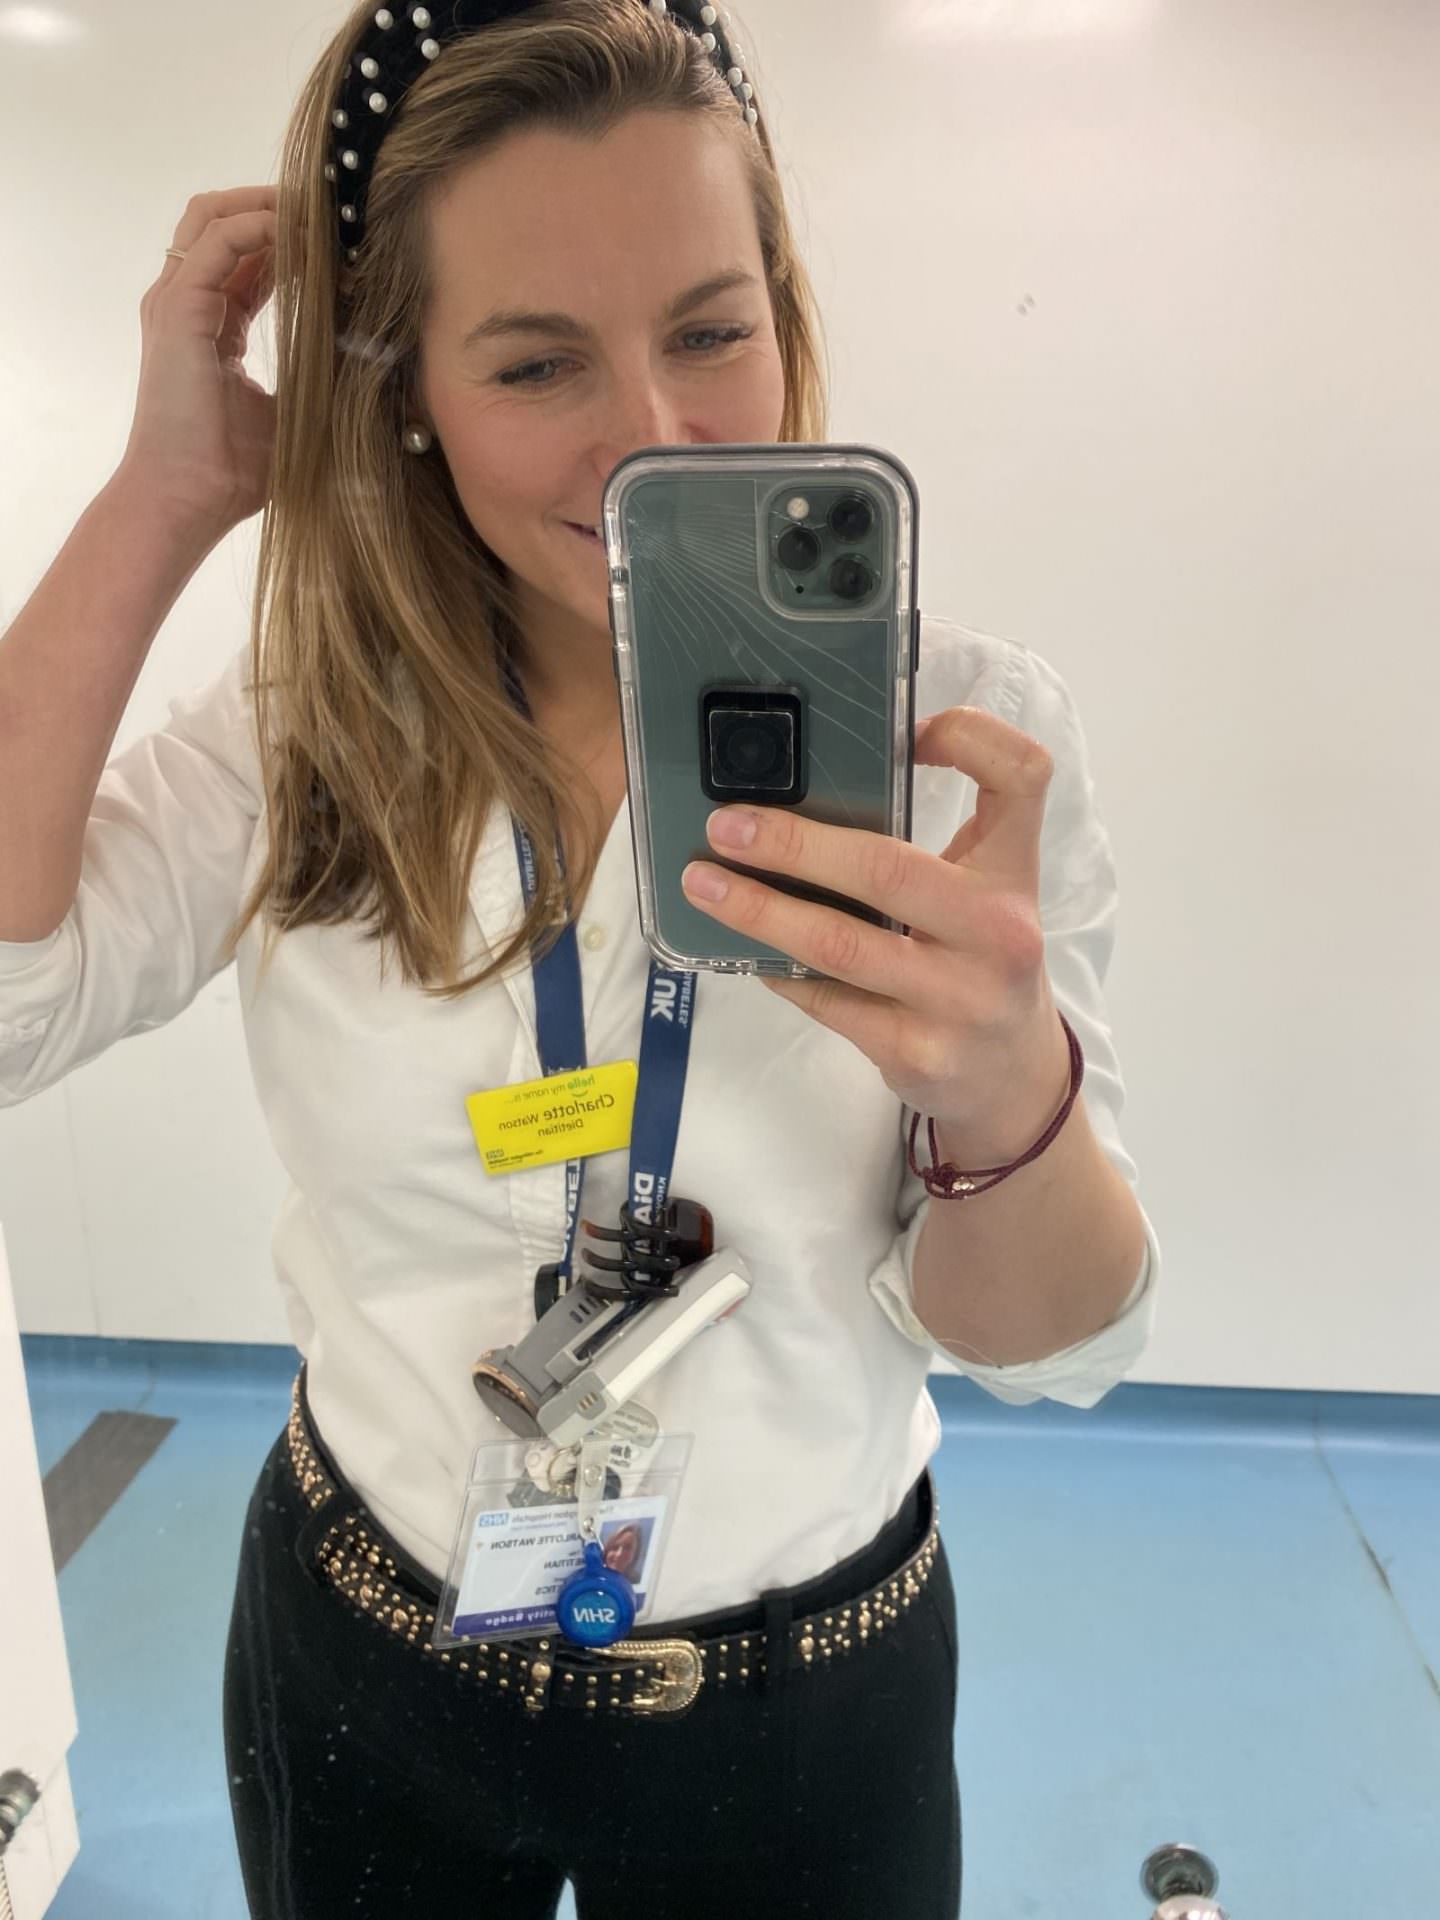 Working as a Band 5 NHS Dietitian